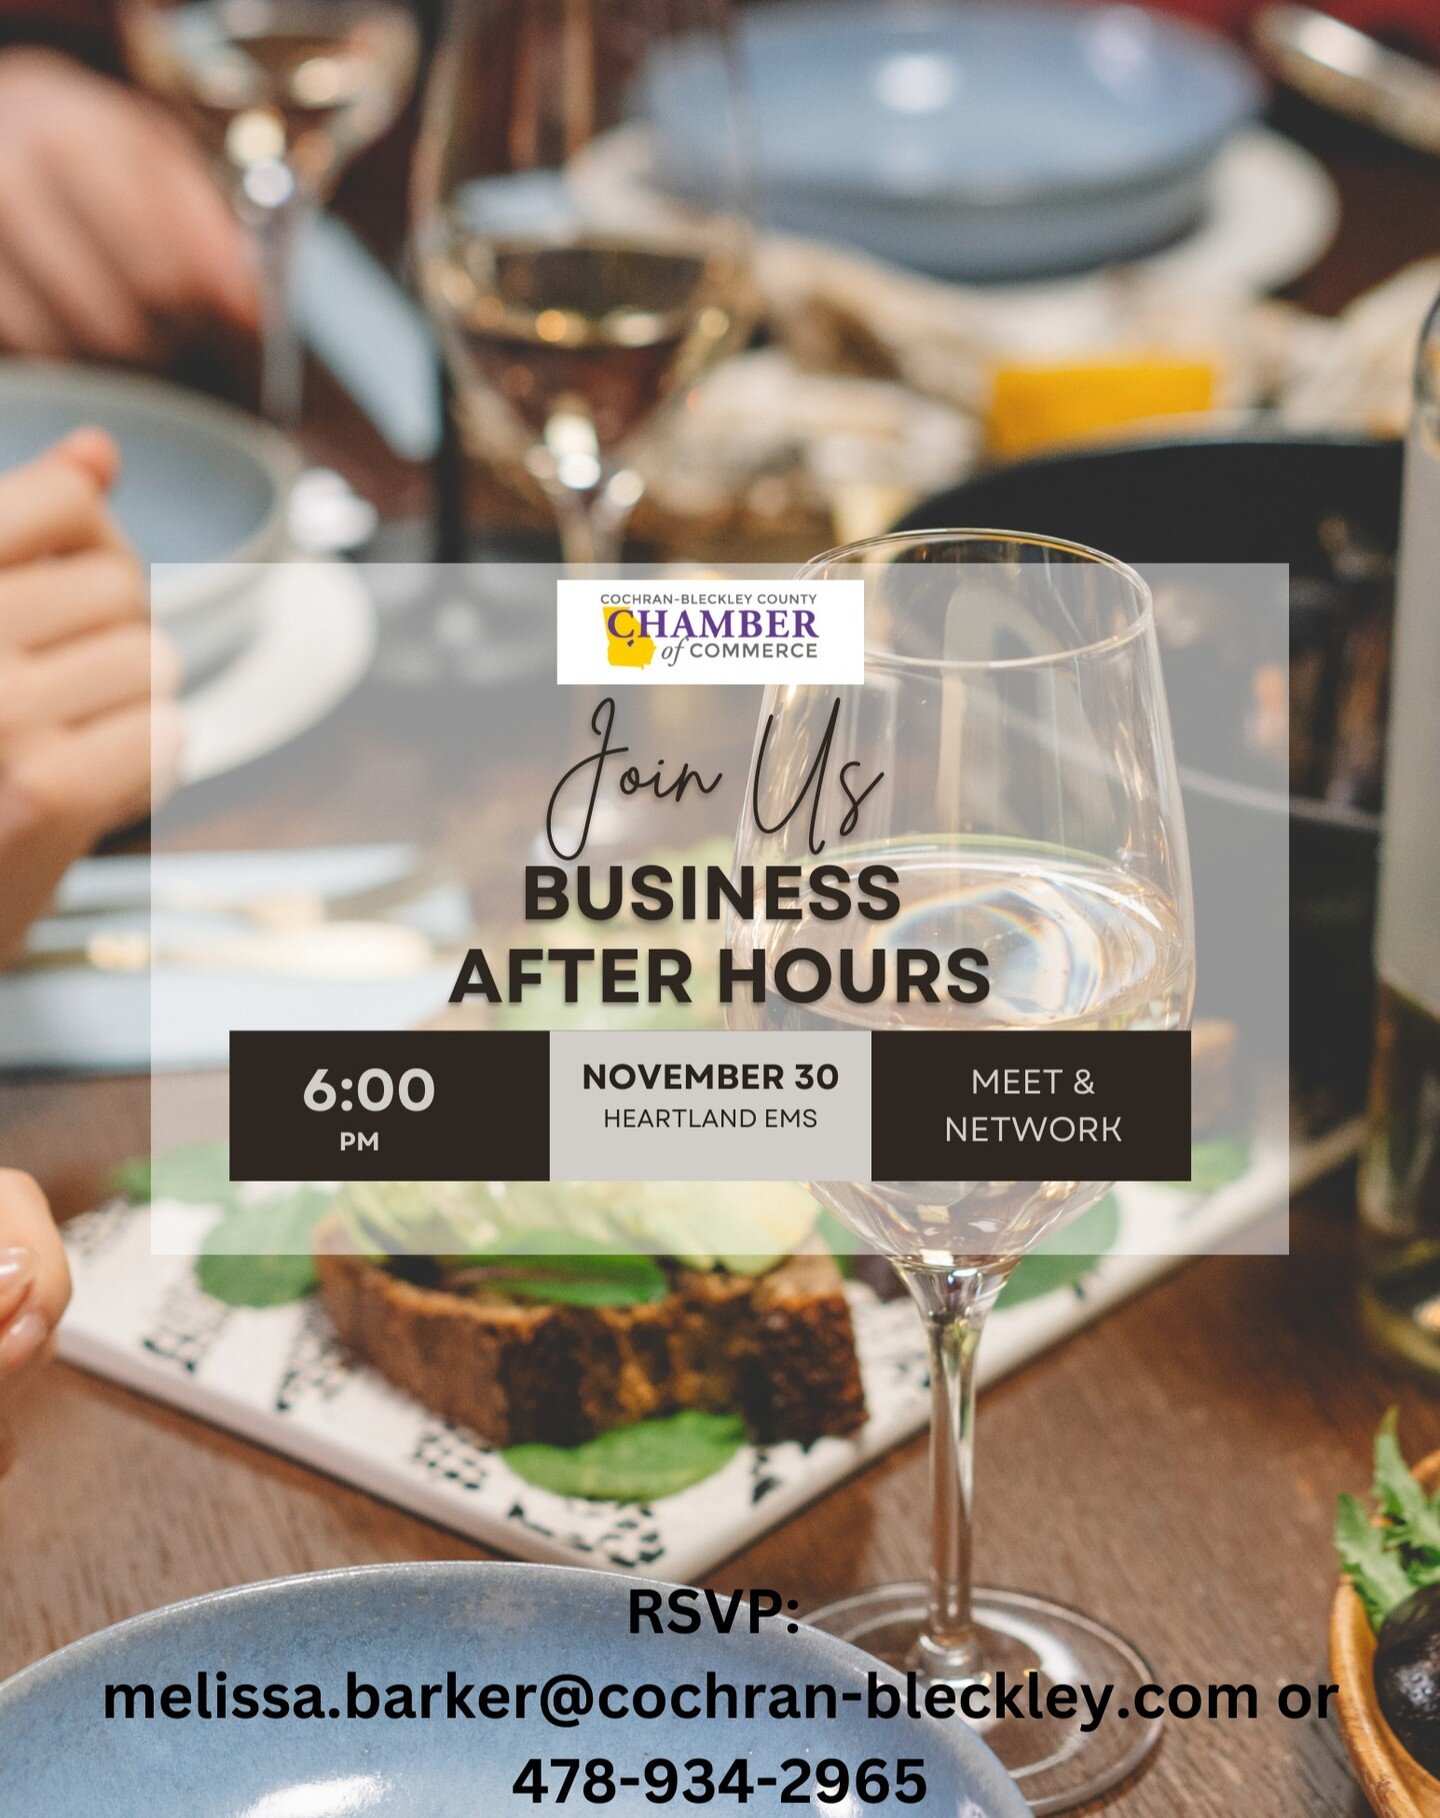 Business After Hours is just around the corner! Please come join us, but please RSVP by Friday, November 24th!

email or call Melissa :
melissa.barker@cochran-bleckley.com
478-934-2965